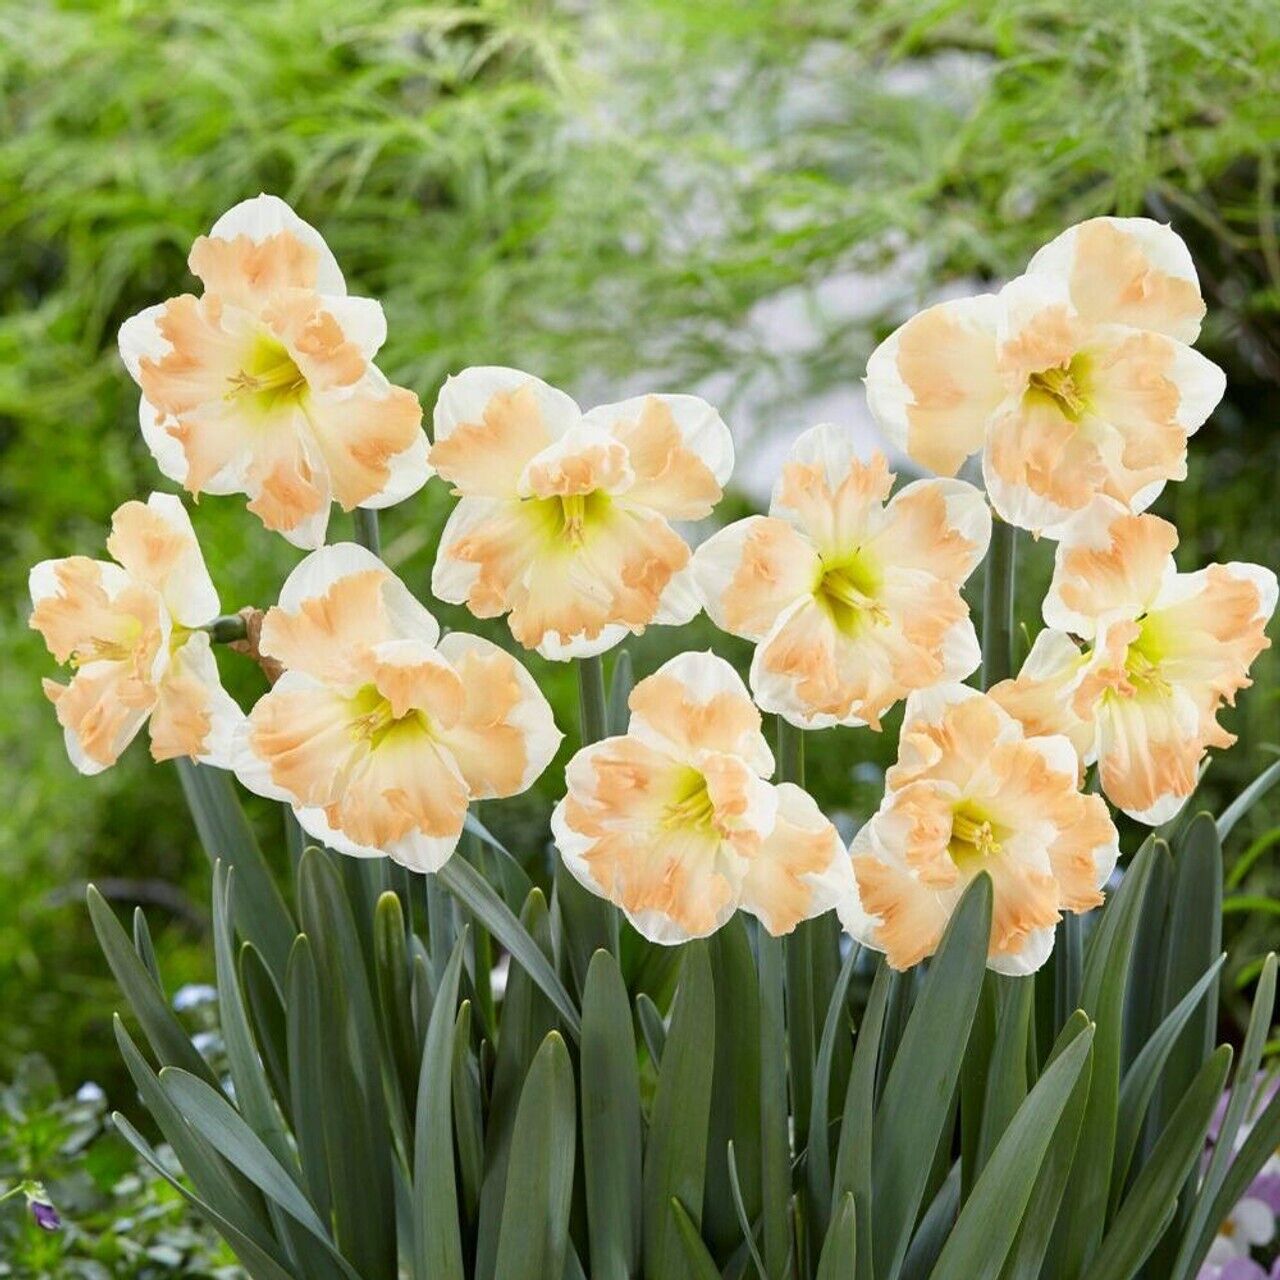 NARCISSUS 'CUM LAUDE' HARDY FLOWER BULBS FRAGRANT DAFFODILS PLANT NOW FOR SPRING